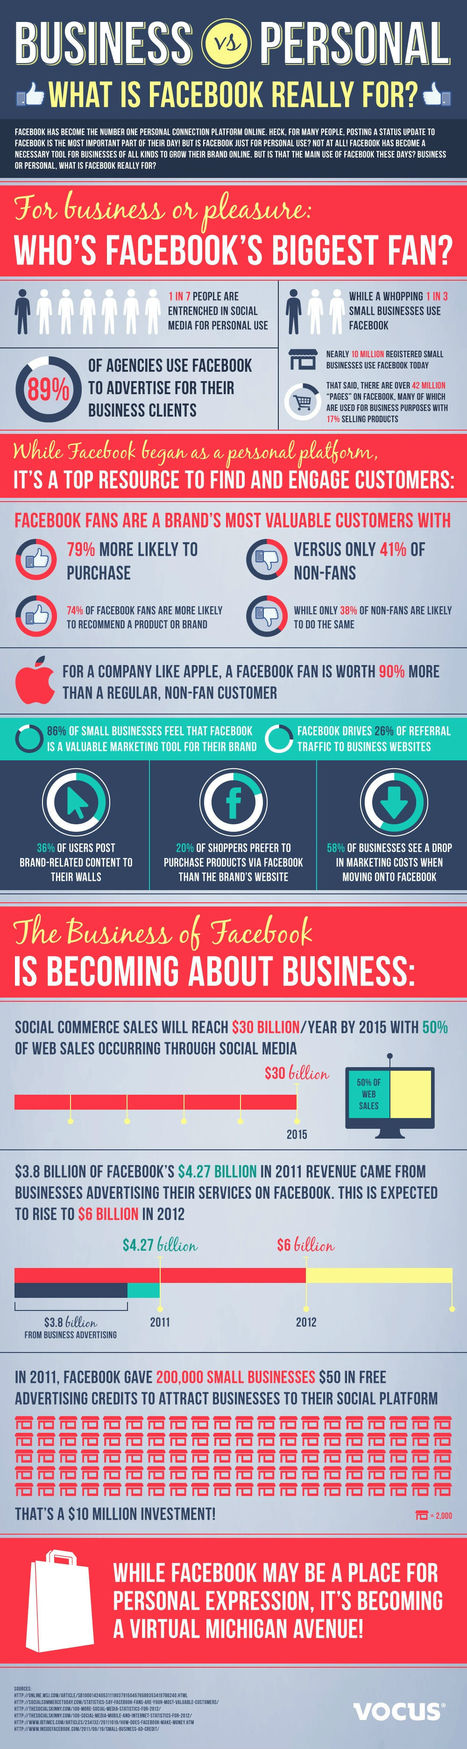 50% of Web Sales to Occur Via Social Media by 2015 [INFOGRAPHIC] | Marketing_me | Scoop.it